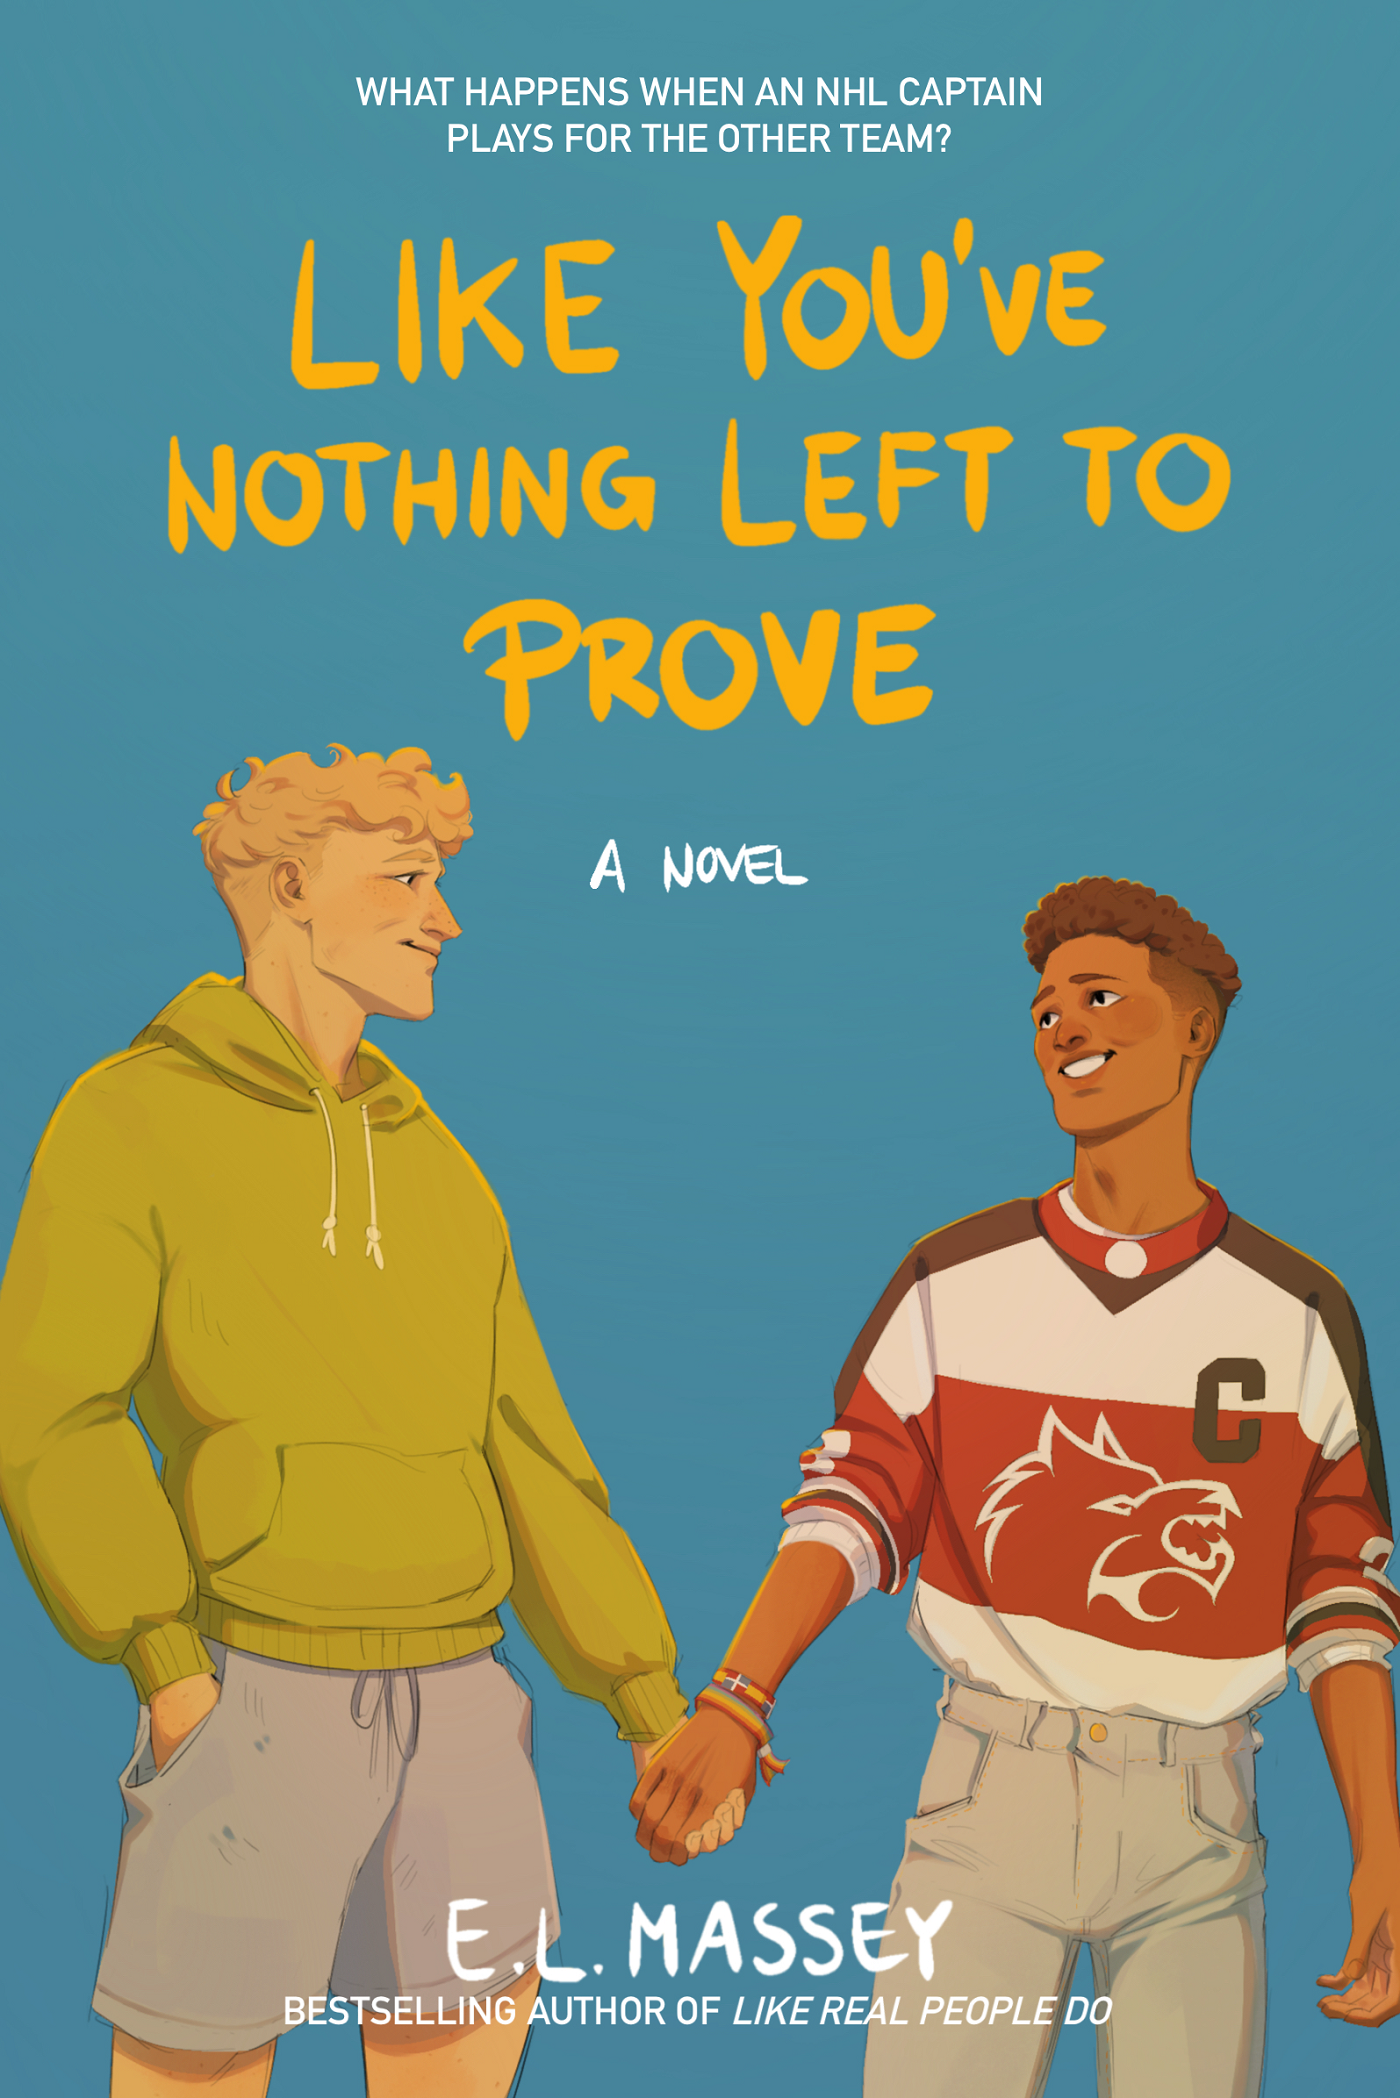 Like You’ve Nothing Left to Prove by E.L. Massey PDF Download